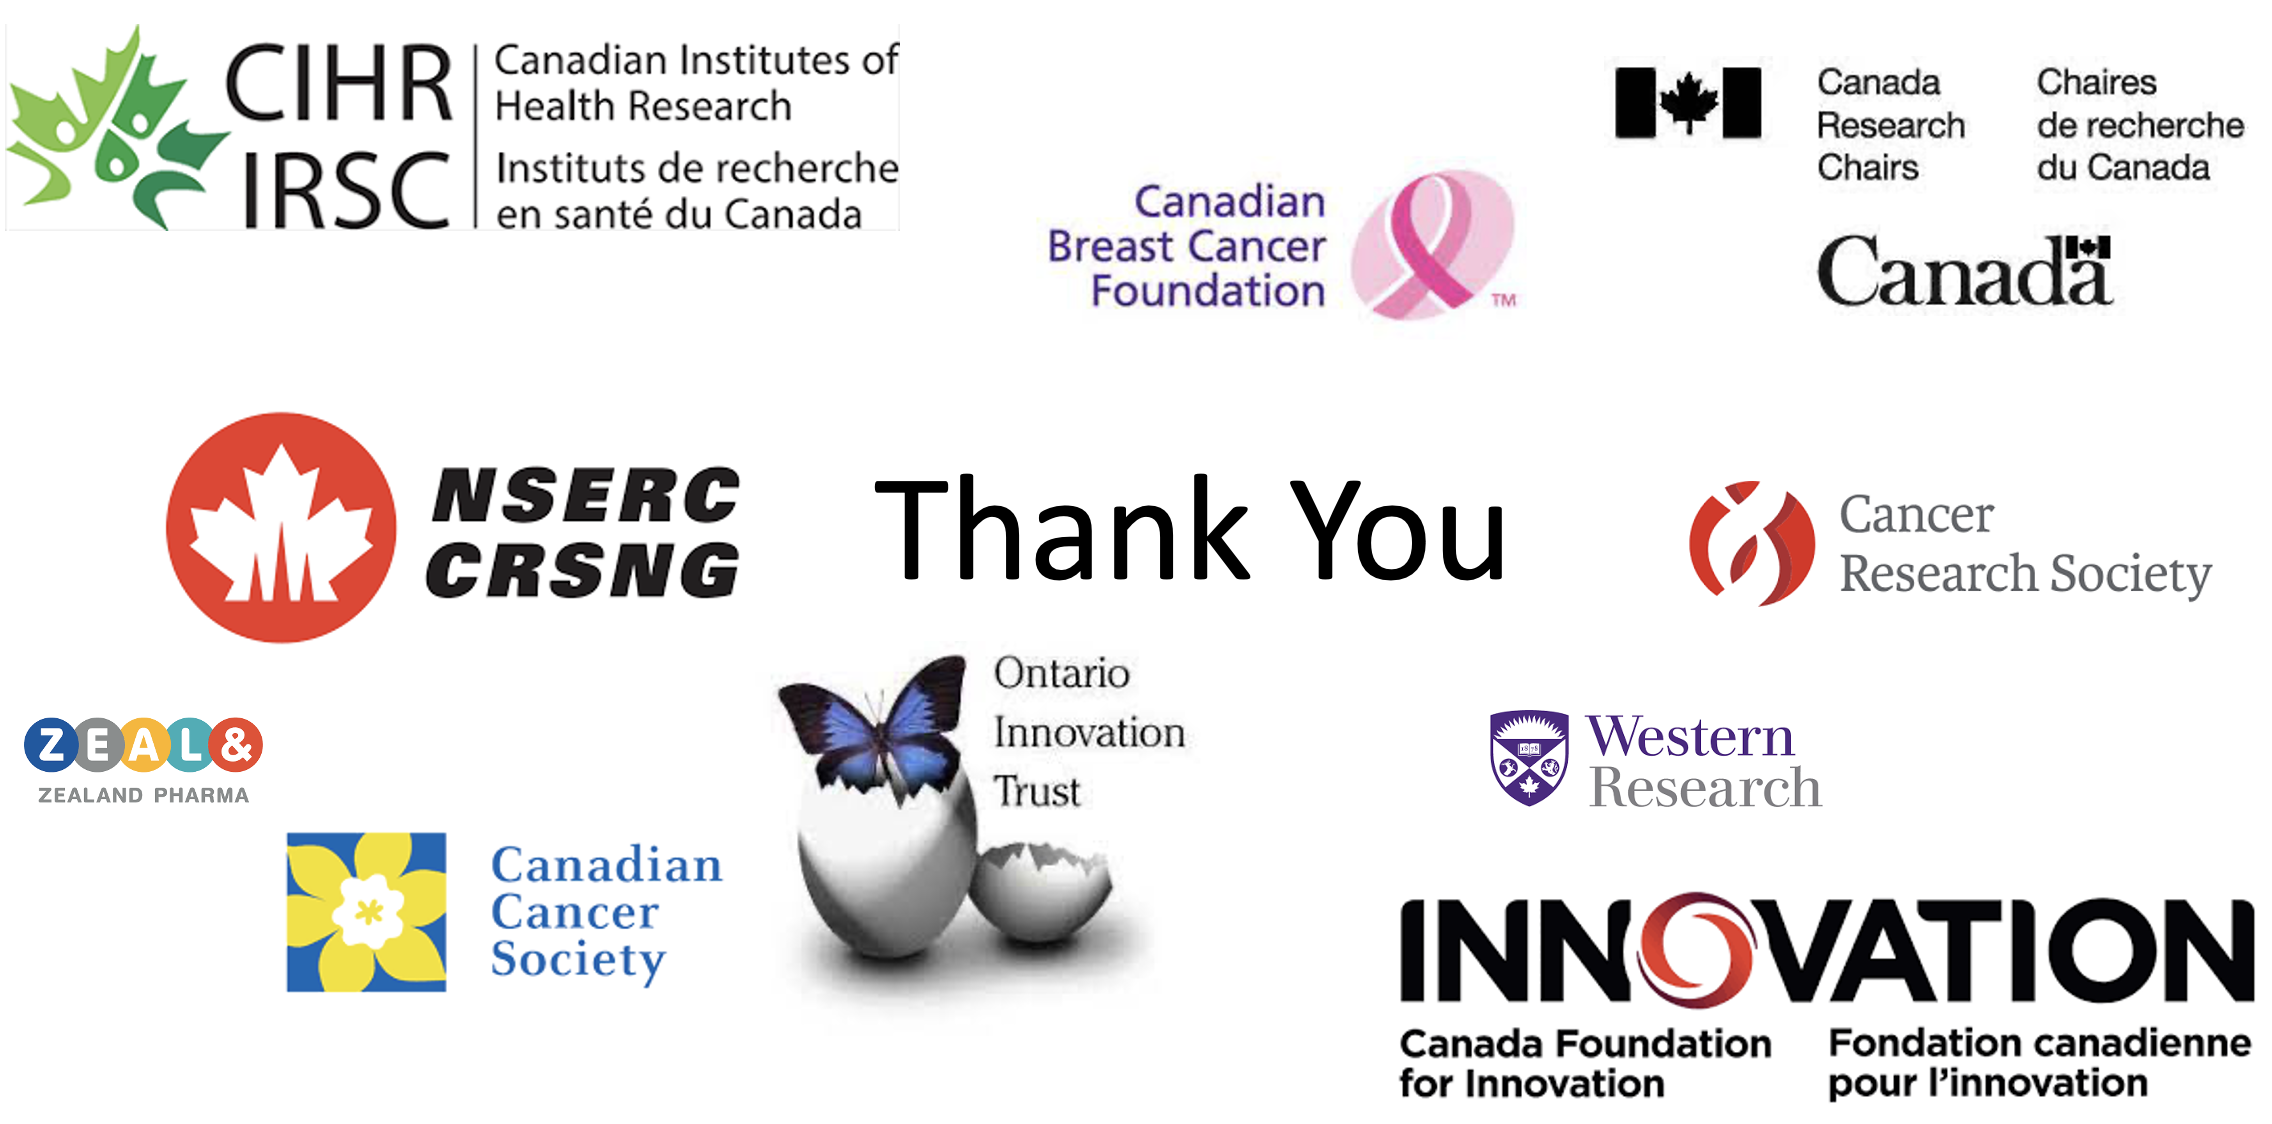 Canadian Institutes of Health Research, Canadian Breast Cancer Foundation, Canadian Research Chairs, Cancer Research Society, Western Research, Canada Foundation for Innovation, Ontario Innovation Trust, Canadian Cancer Society, NSERC, Zealand Pharma